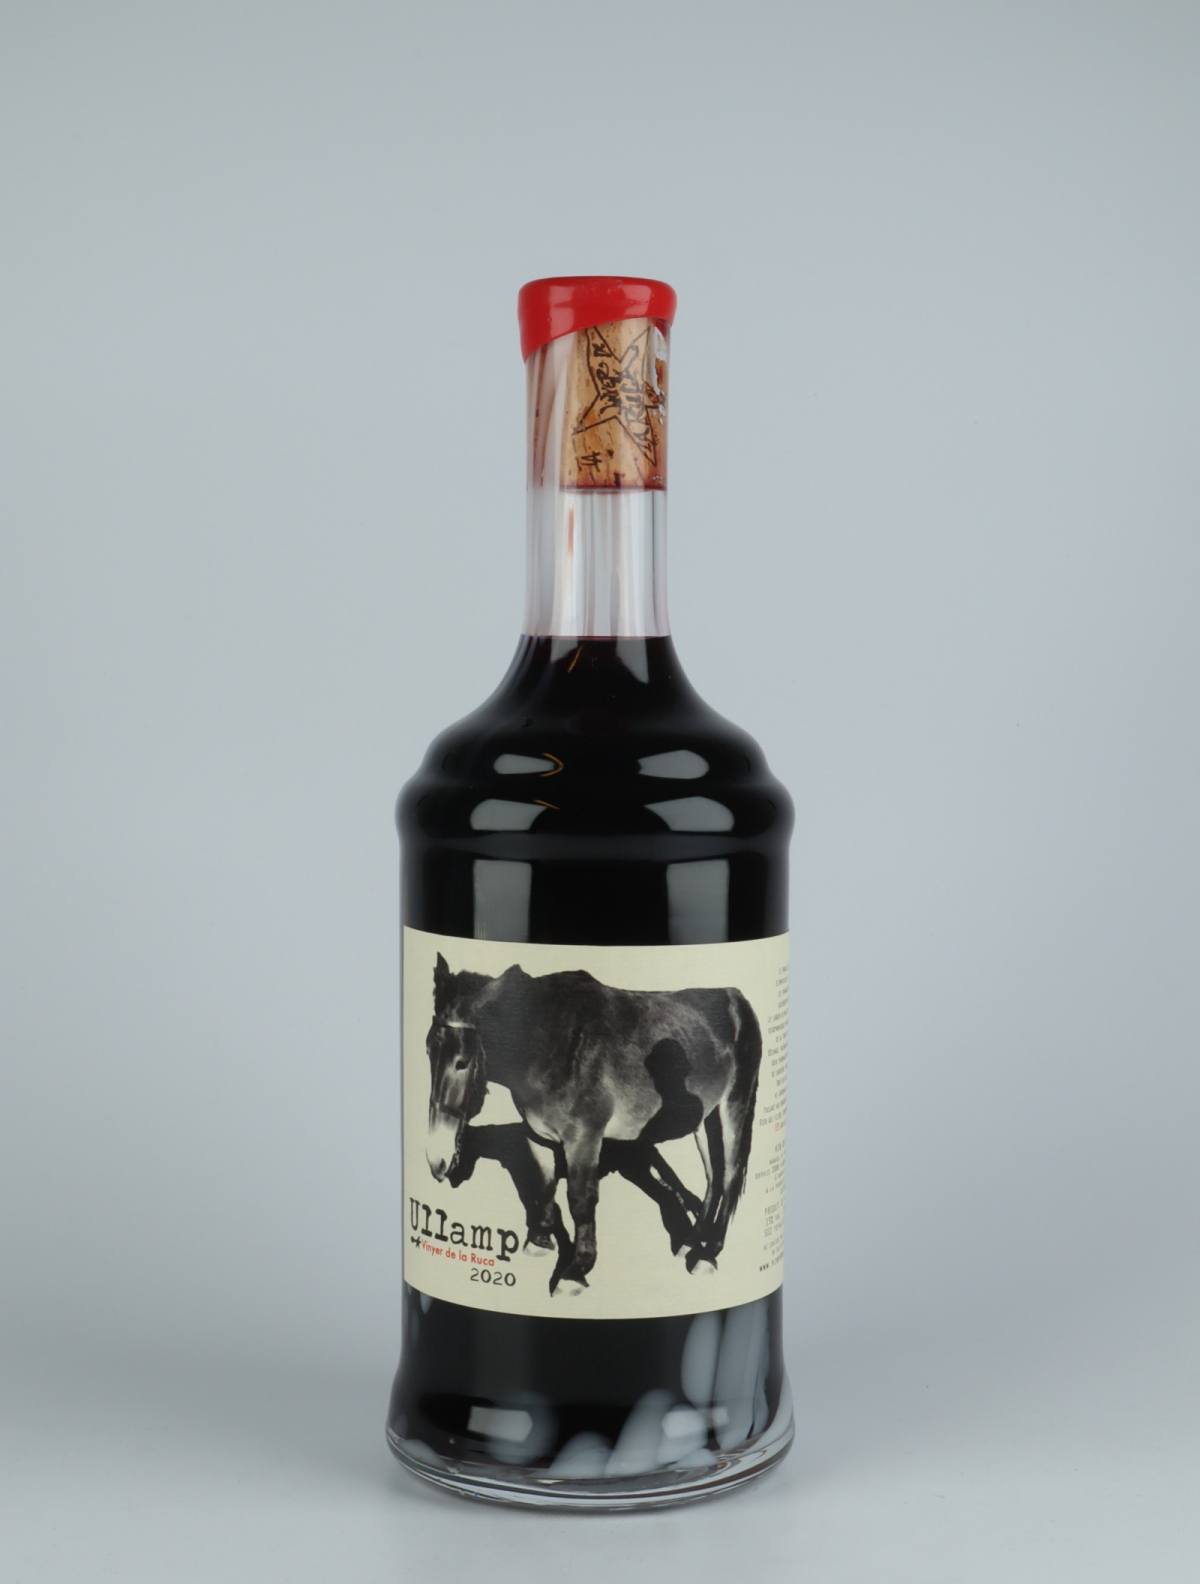 A bottle 2020 Ullamp Red wine from , Rousillon in France